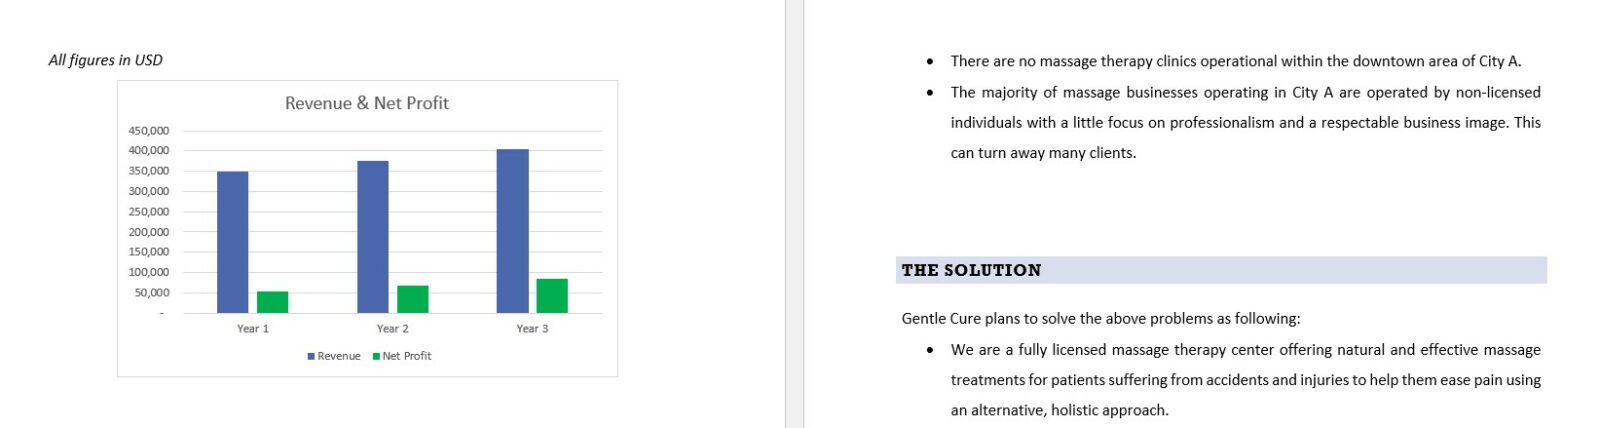 Massage therapy clinic business plan template